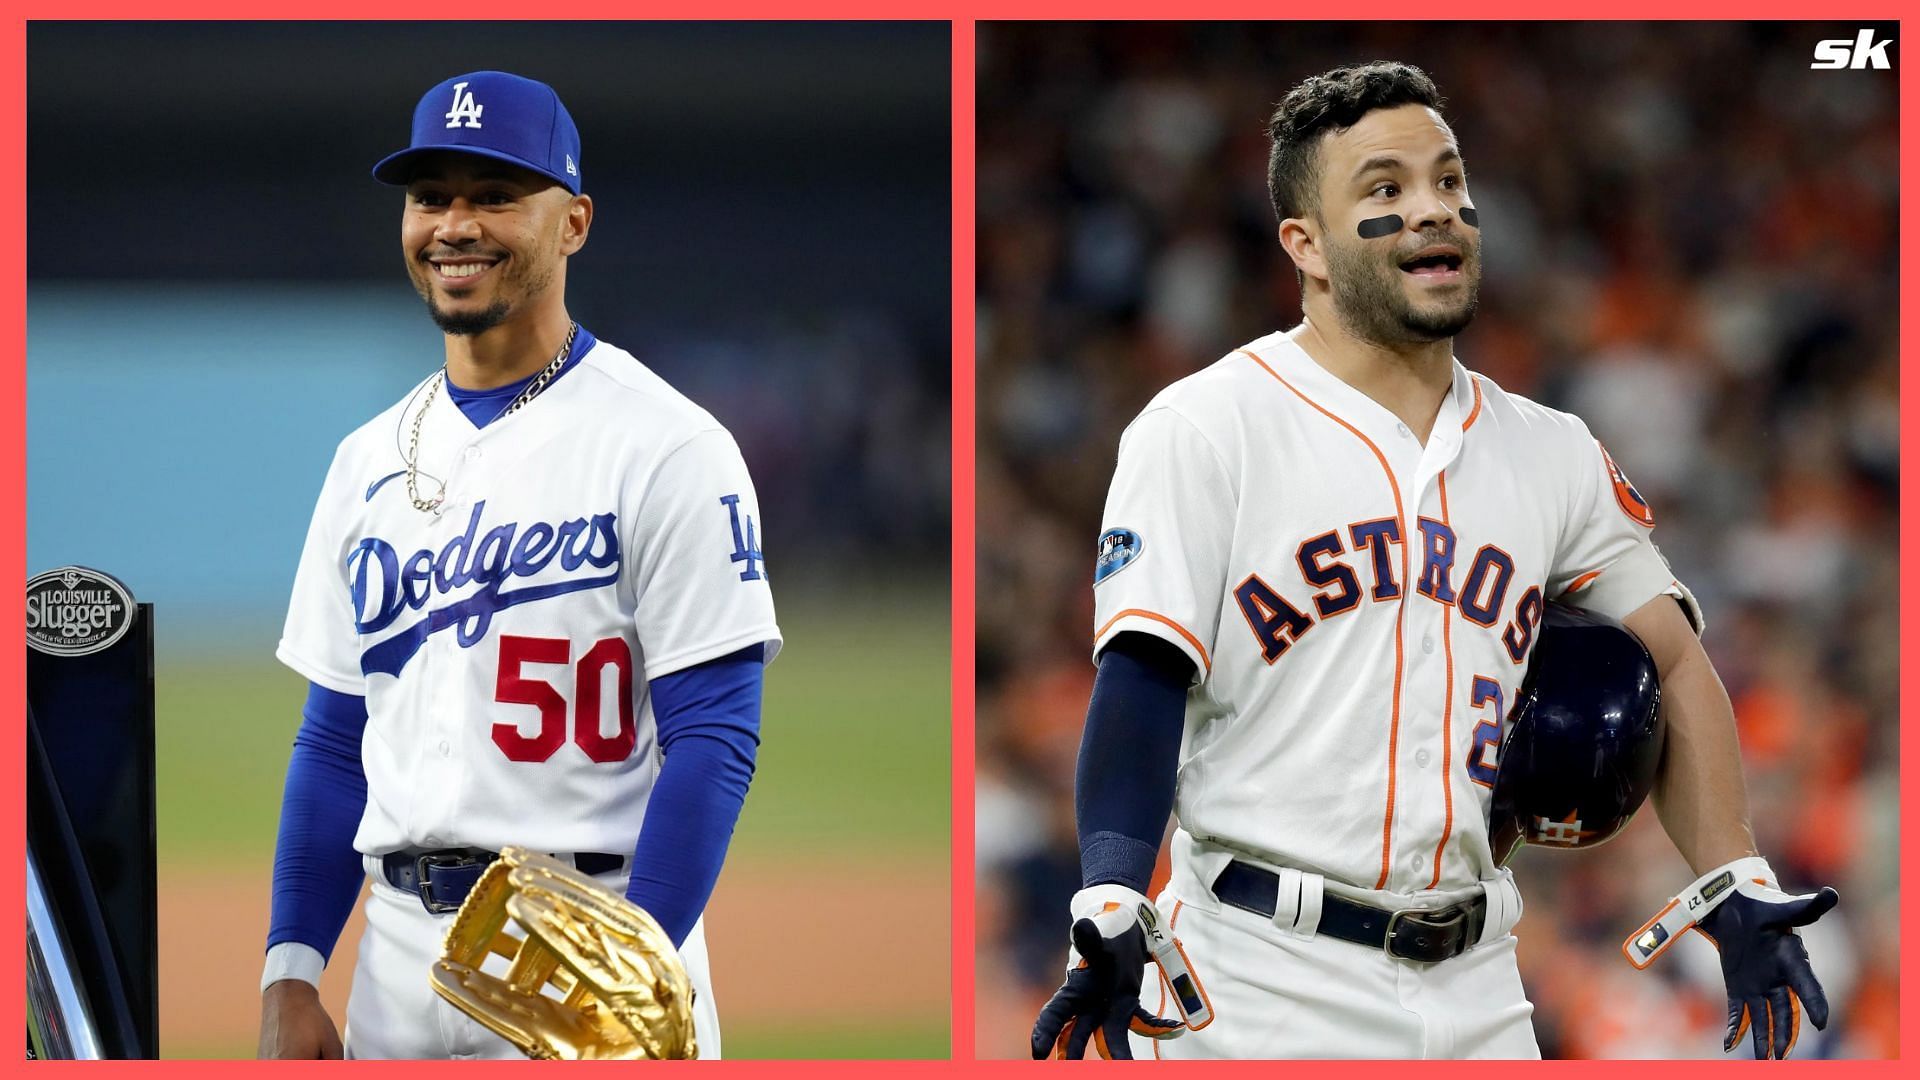 How to watch Dodgers vs Astros TV channels, start time, and live stream details MLB Season